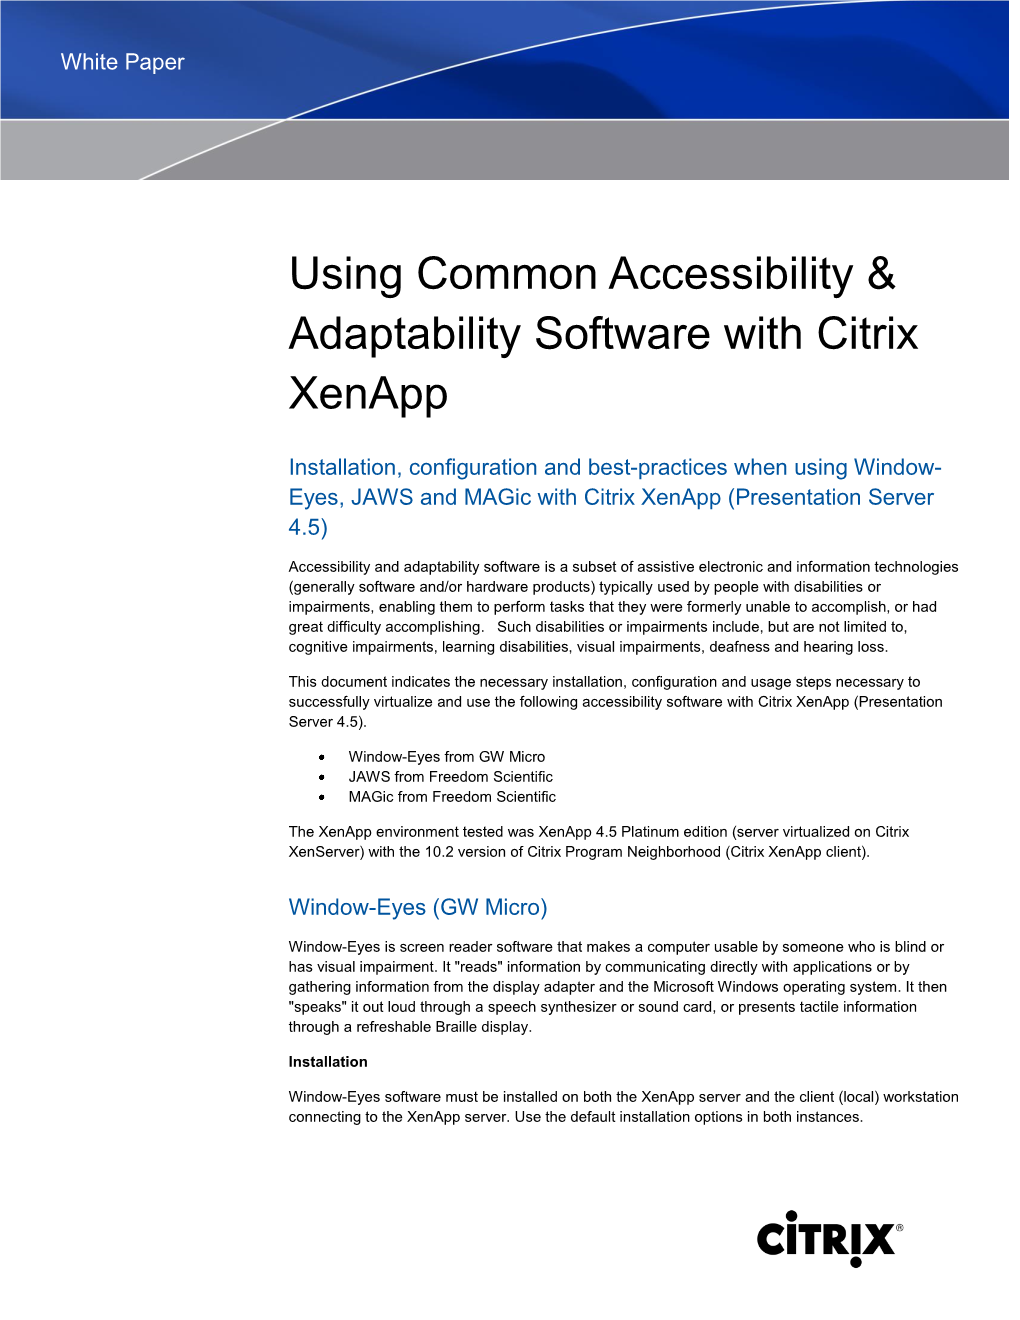 Using Common Accessibility & Adaptability Software with Citrix